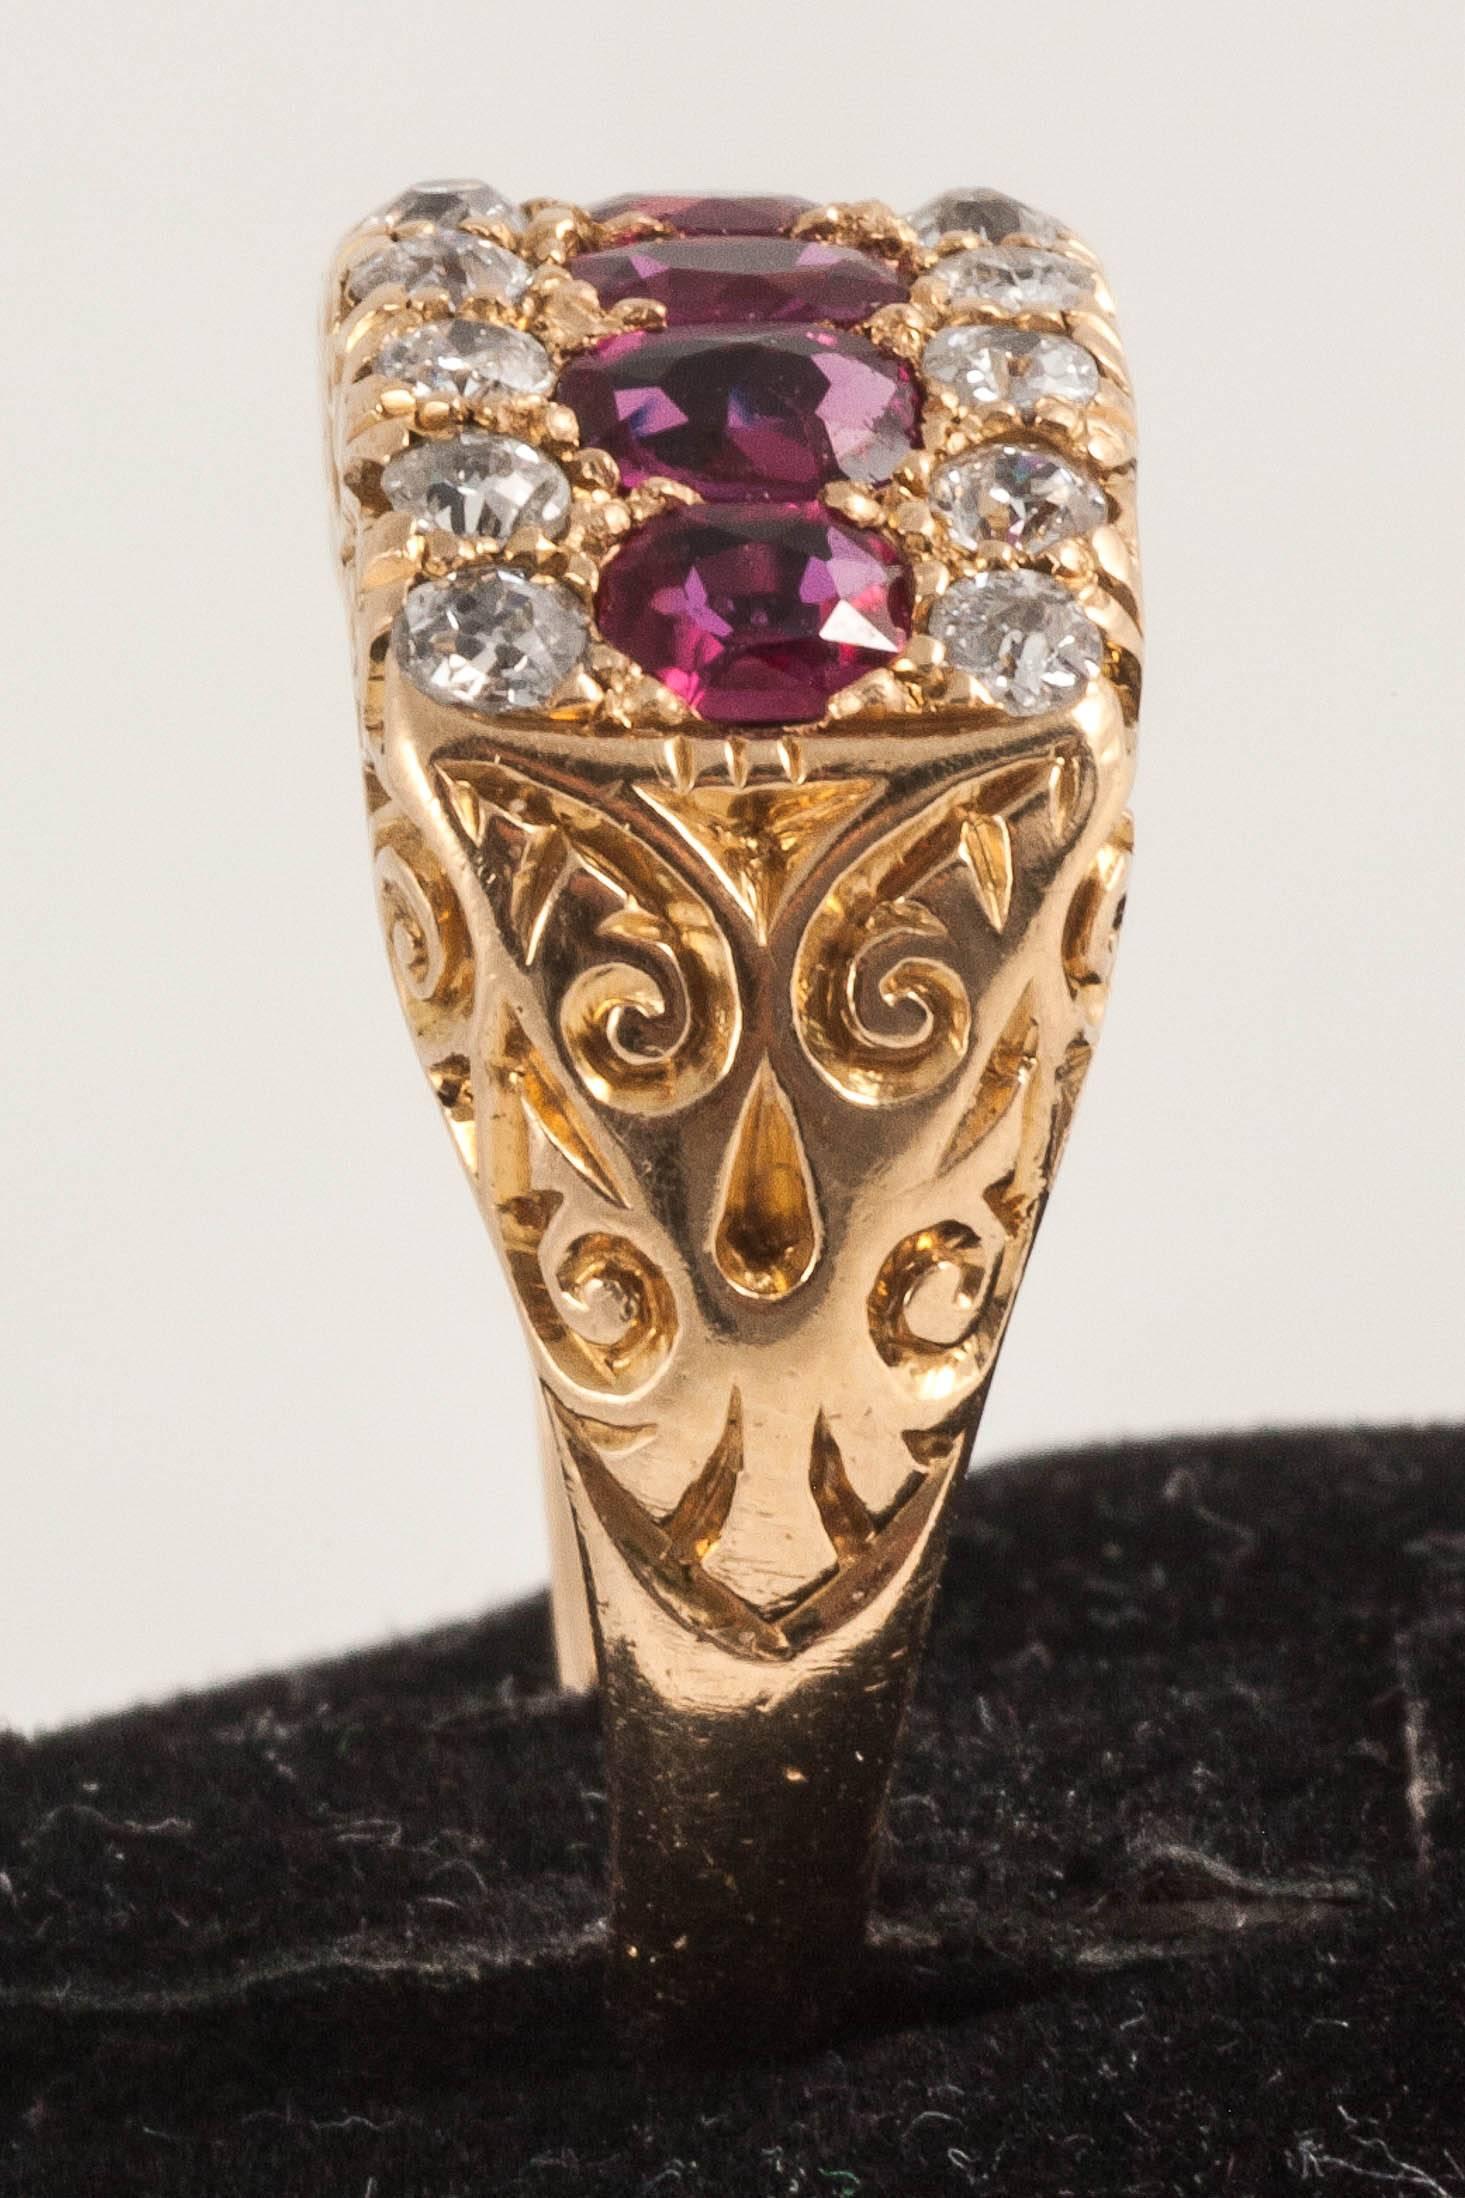 These natural Rubies are flanked by 2 rows of old cut Diamonds set in1`8ct  Gold

Finger size M